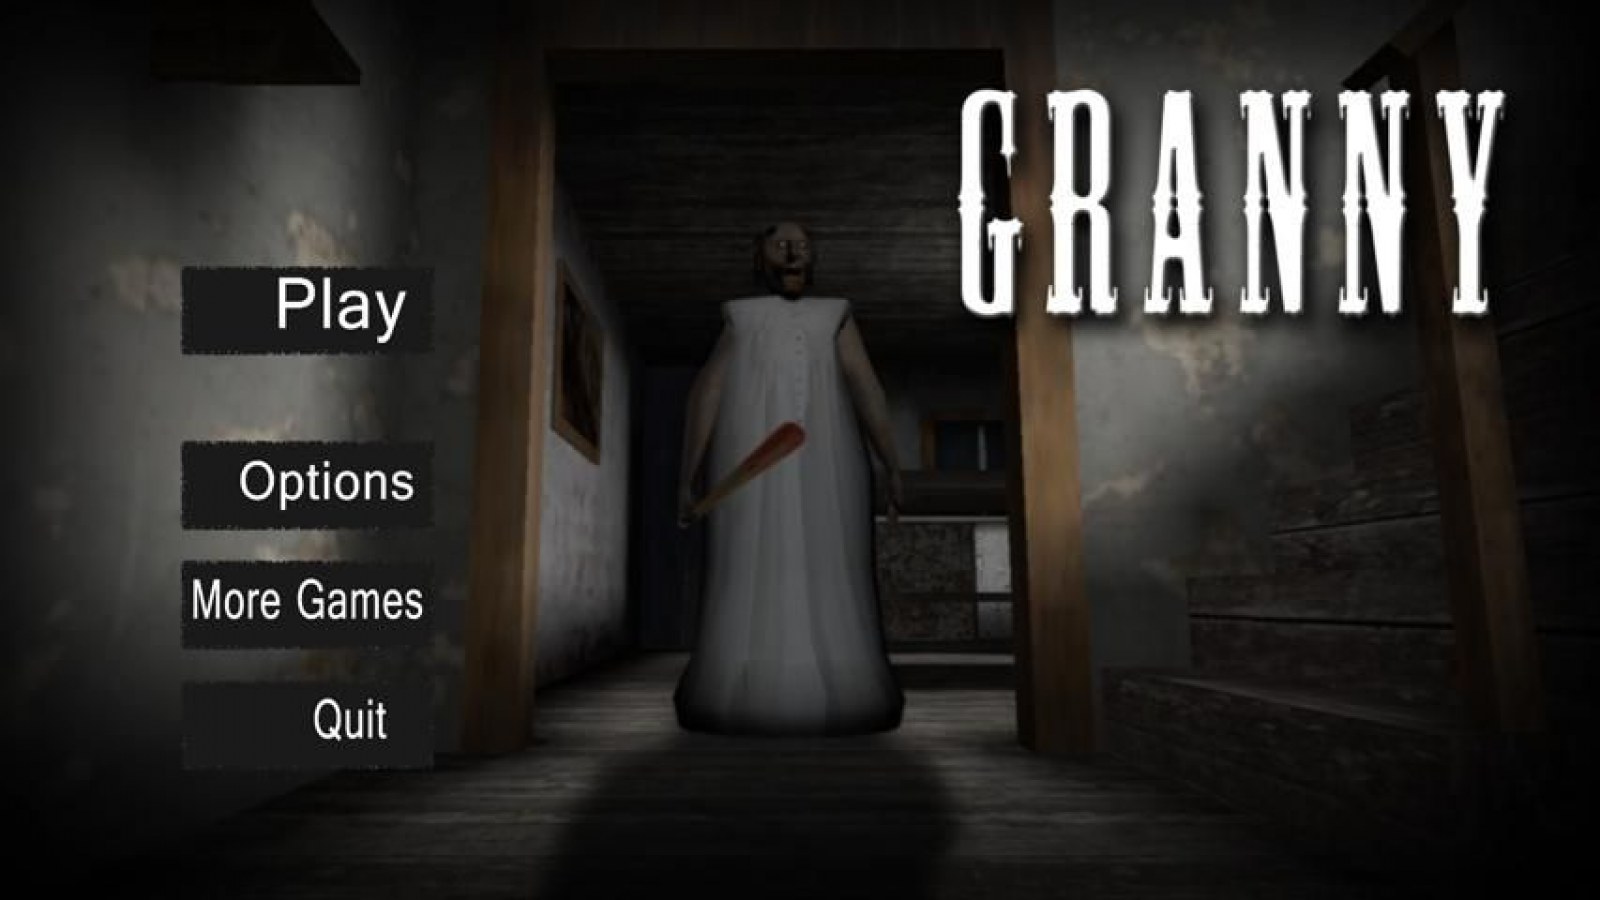 How To Beat Granny Horror Game Tips Steps Strategy For Getting Out Of The House Alive - granny roblox cheat codes